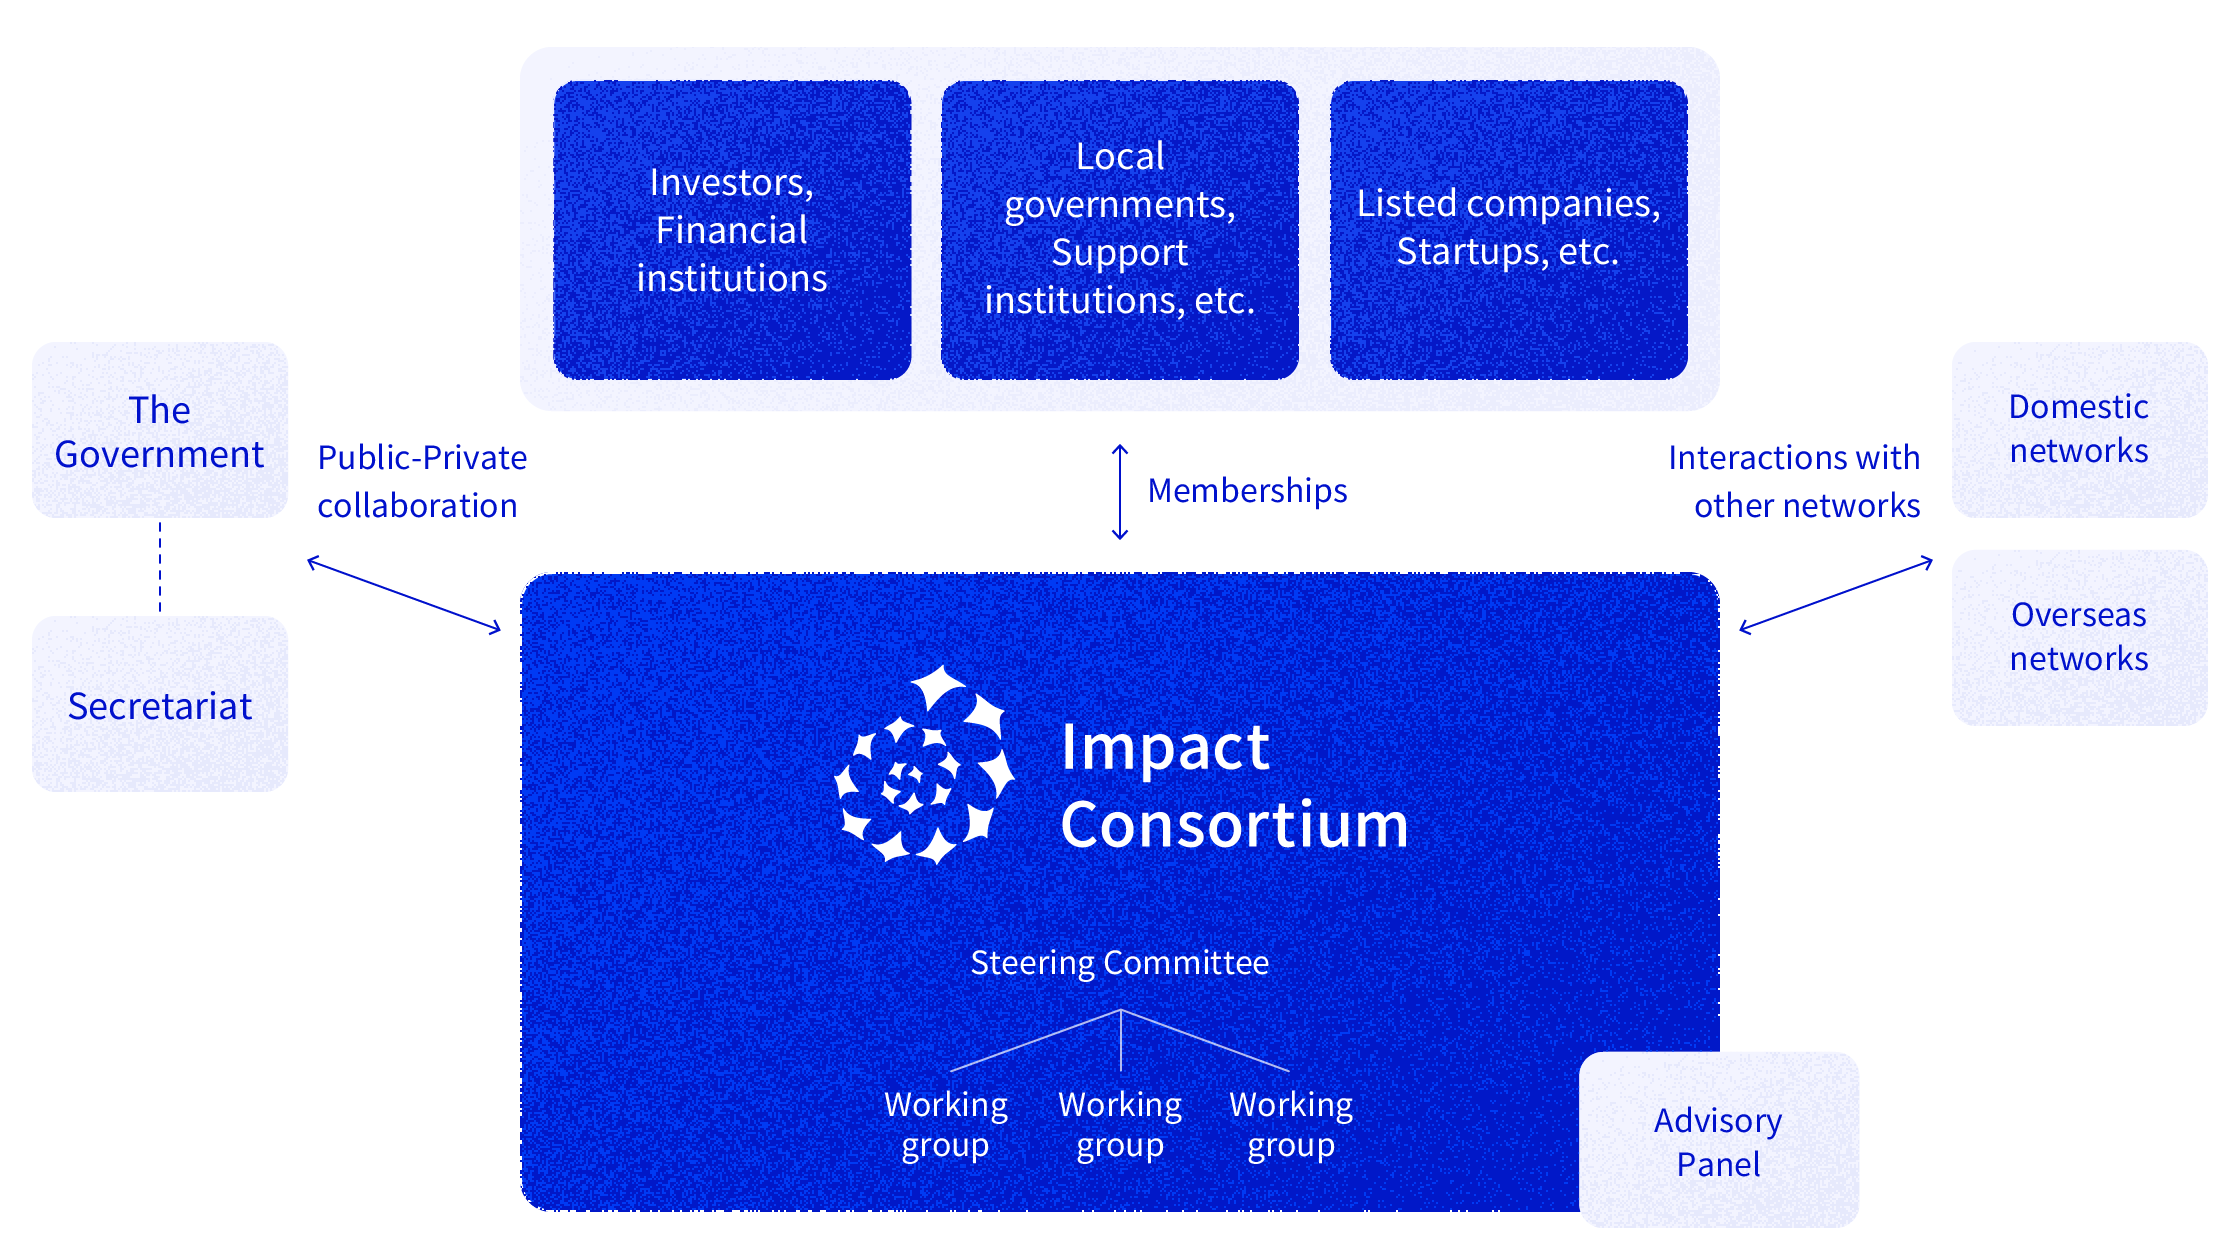 Figure of the composition of the consortium